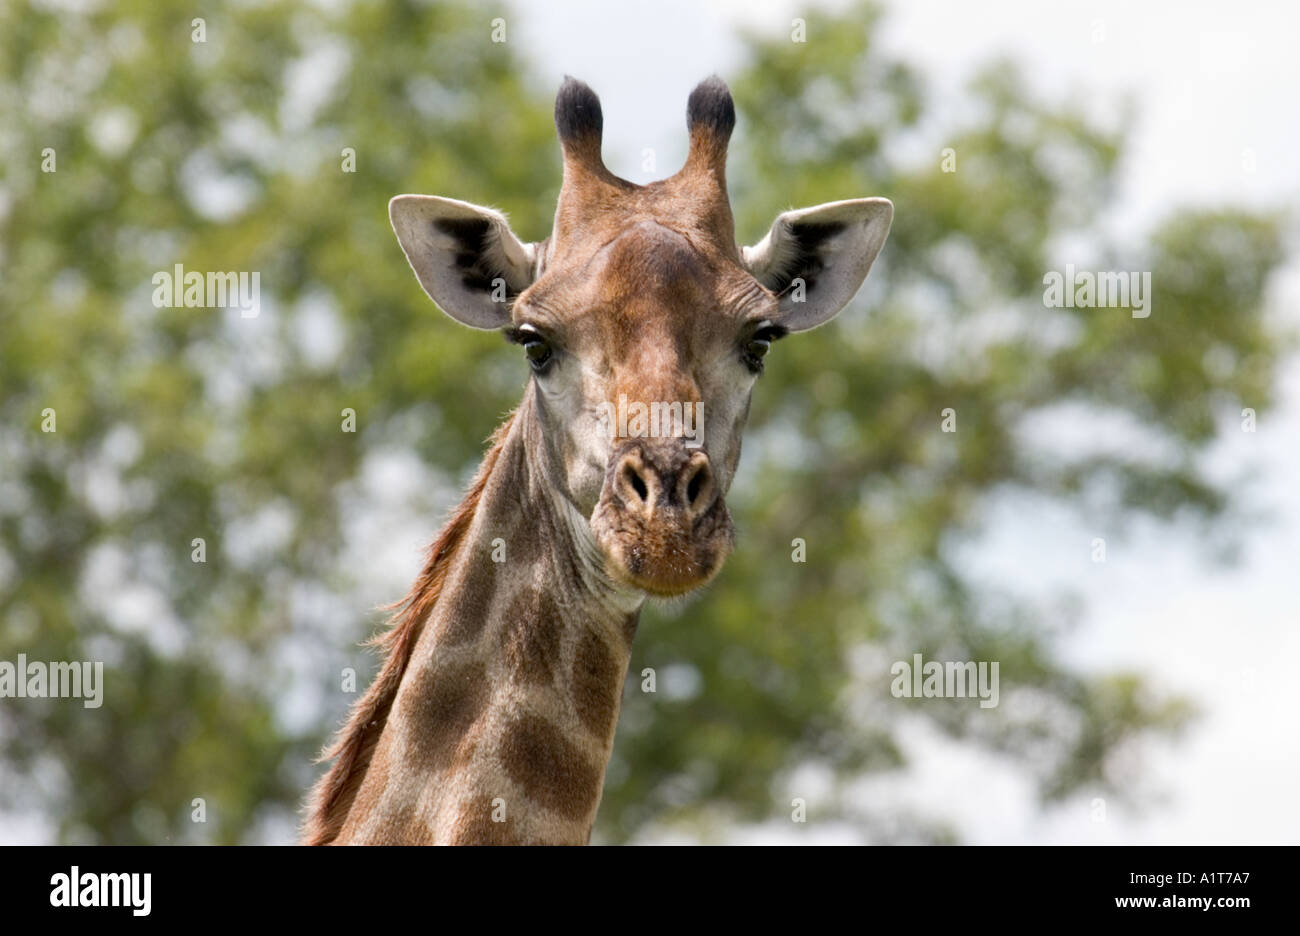 A giraffe face looking at viewer with tree in background in Kruger National Park in South Africa Stock Photo